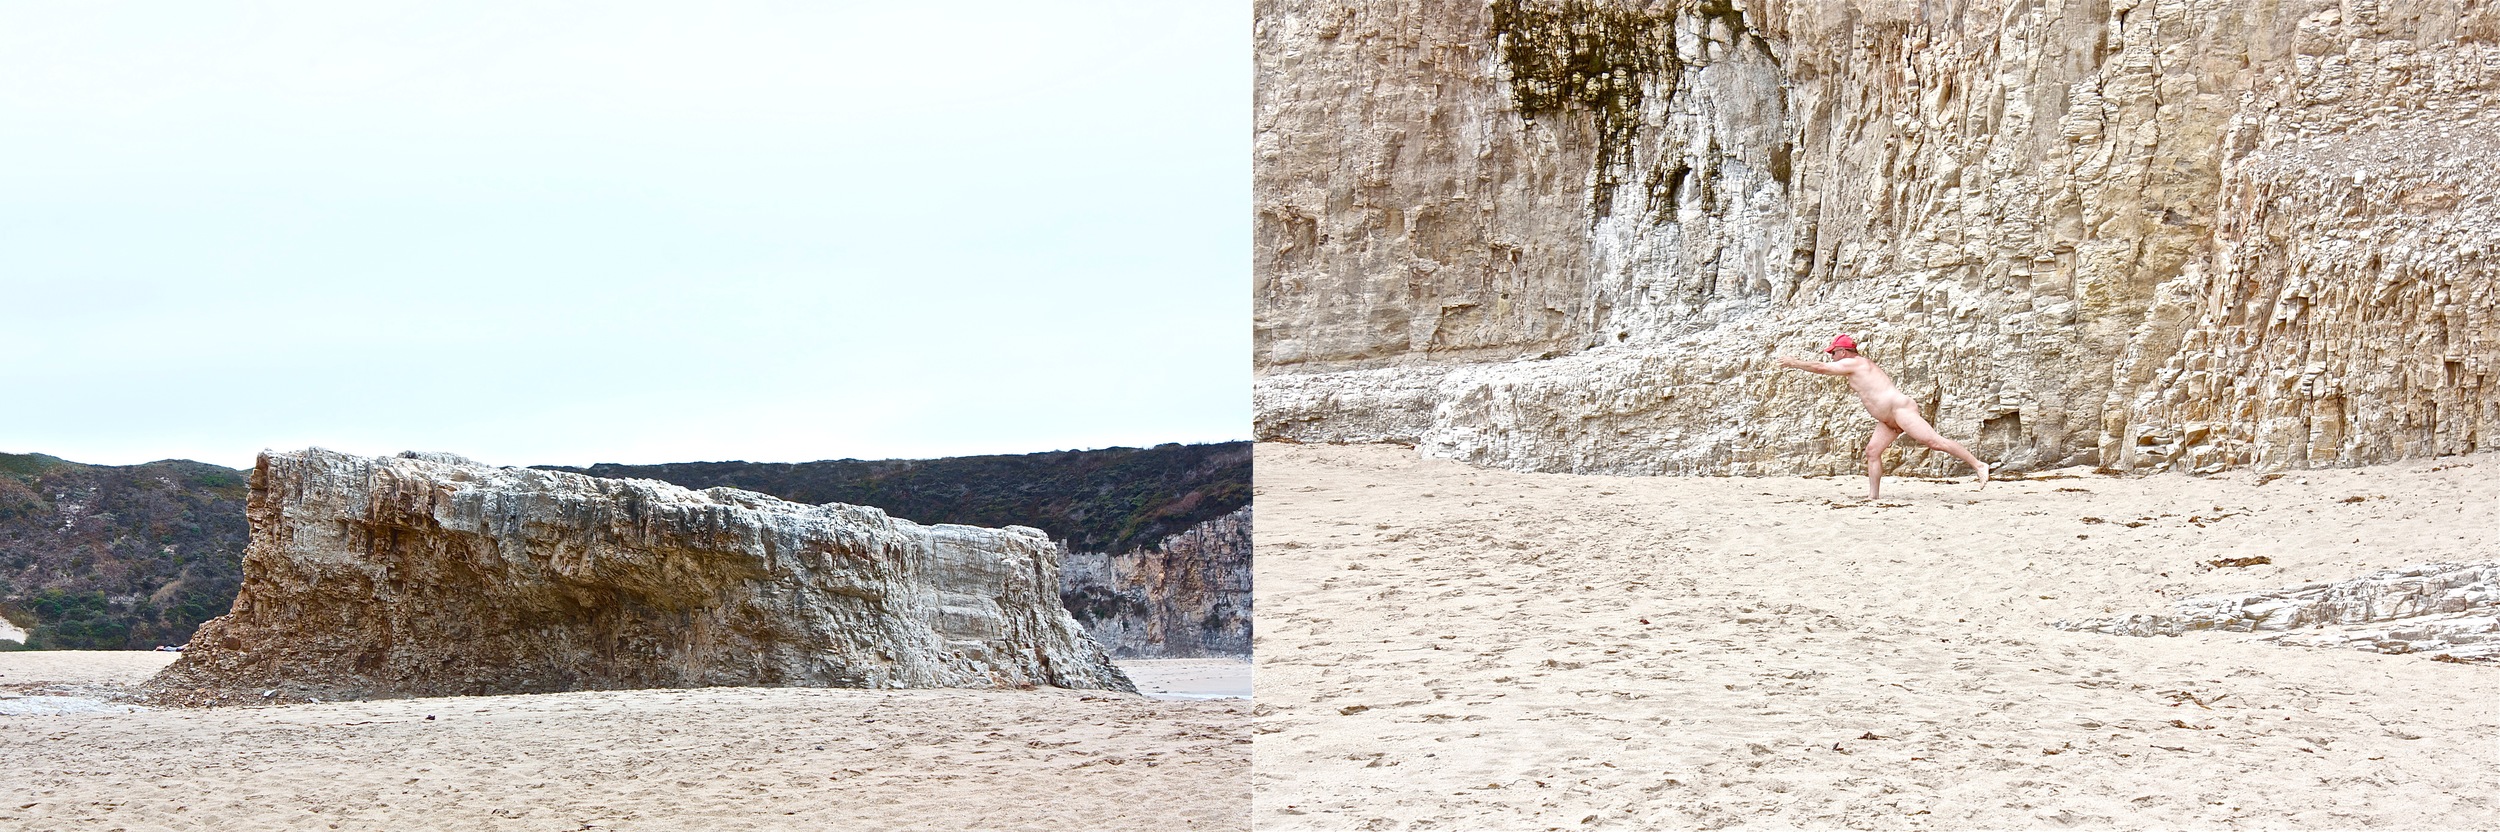 09_diptych2_2014_photography